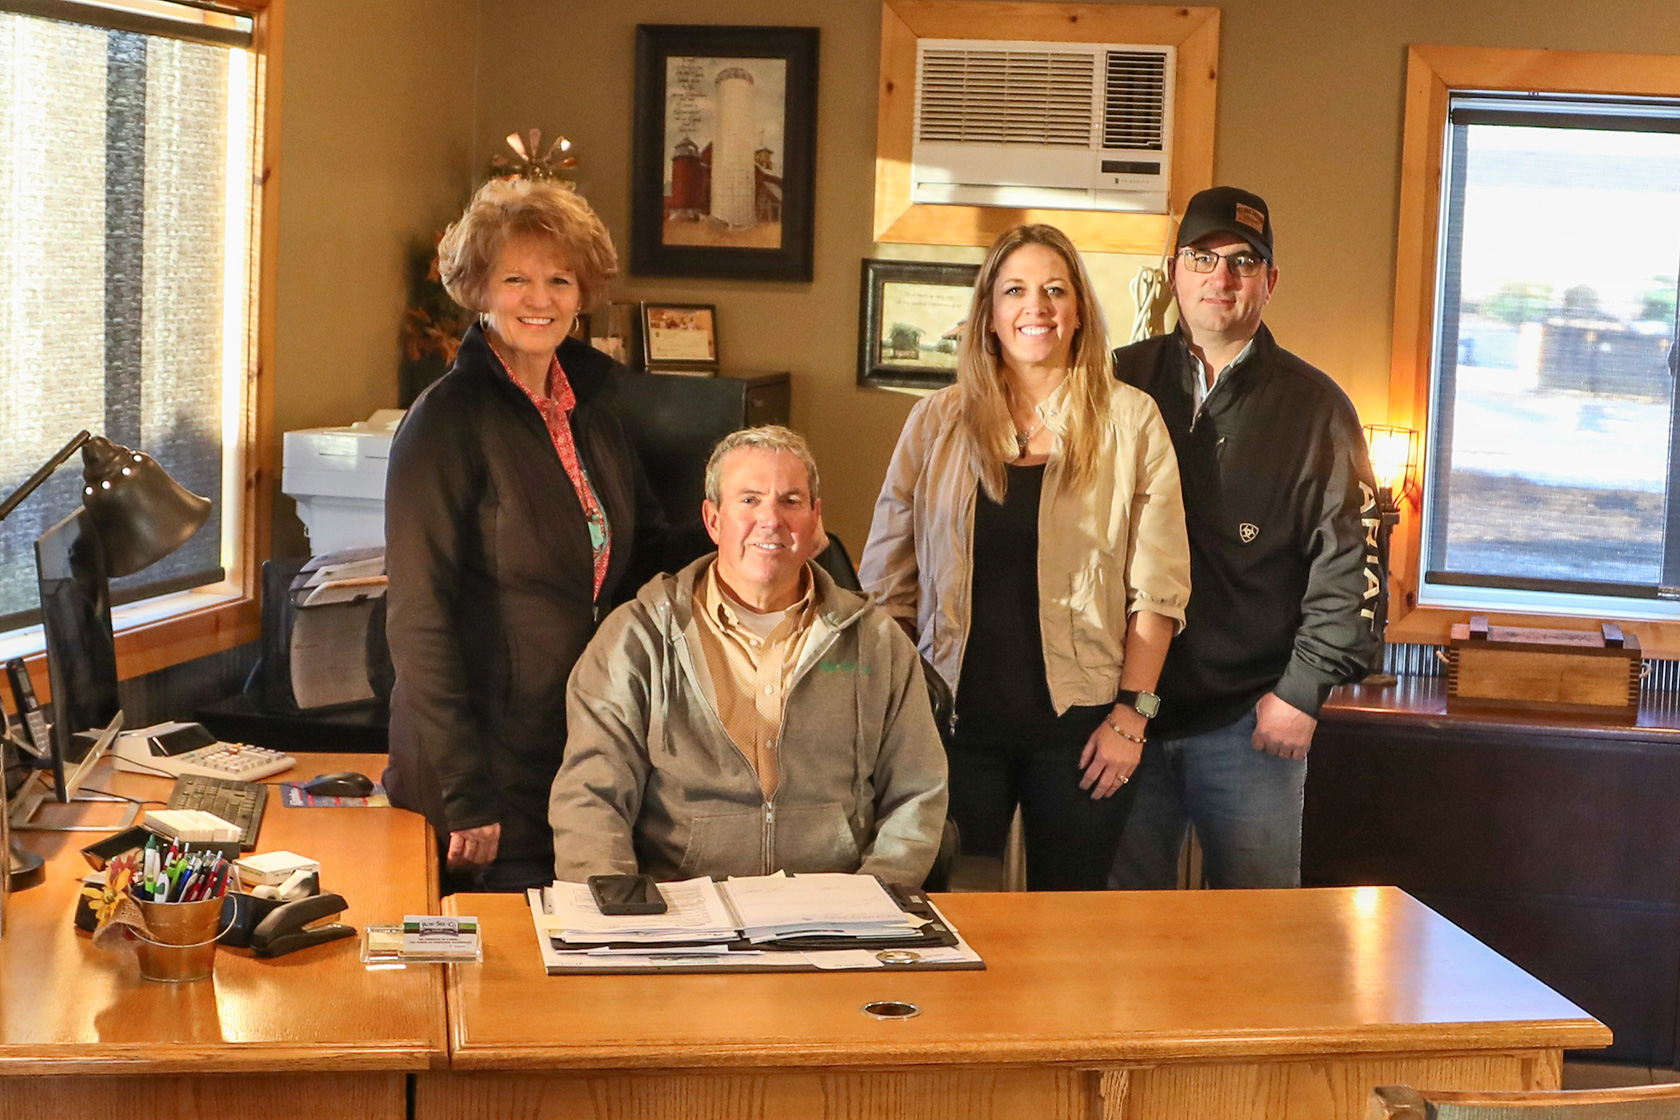 SHOWN LEFT TO RIGHT: Kimberly Ahrenstorff, Jerry Caffee, Hilary and Todd Grohs at the implement dealership offices.